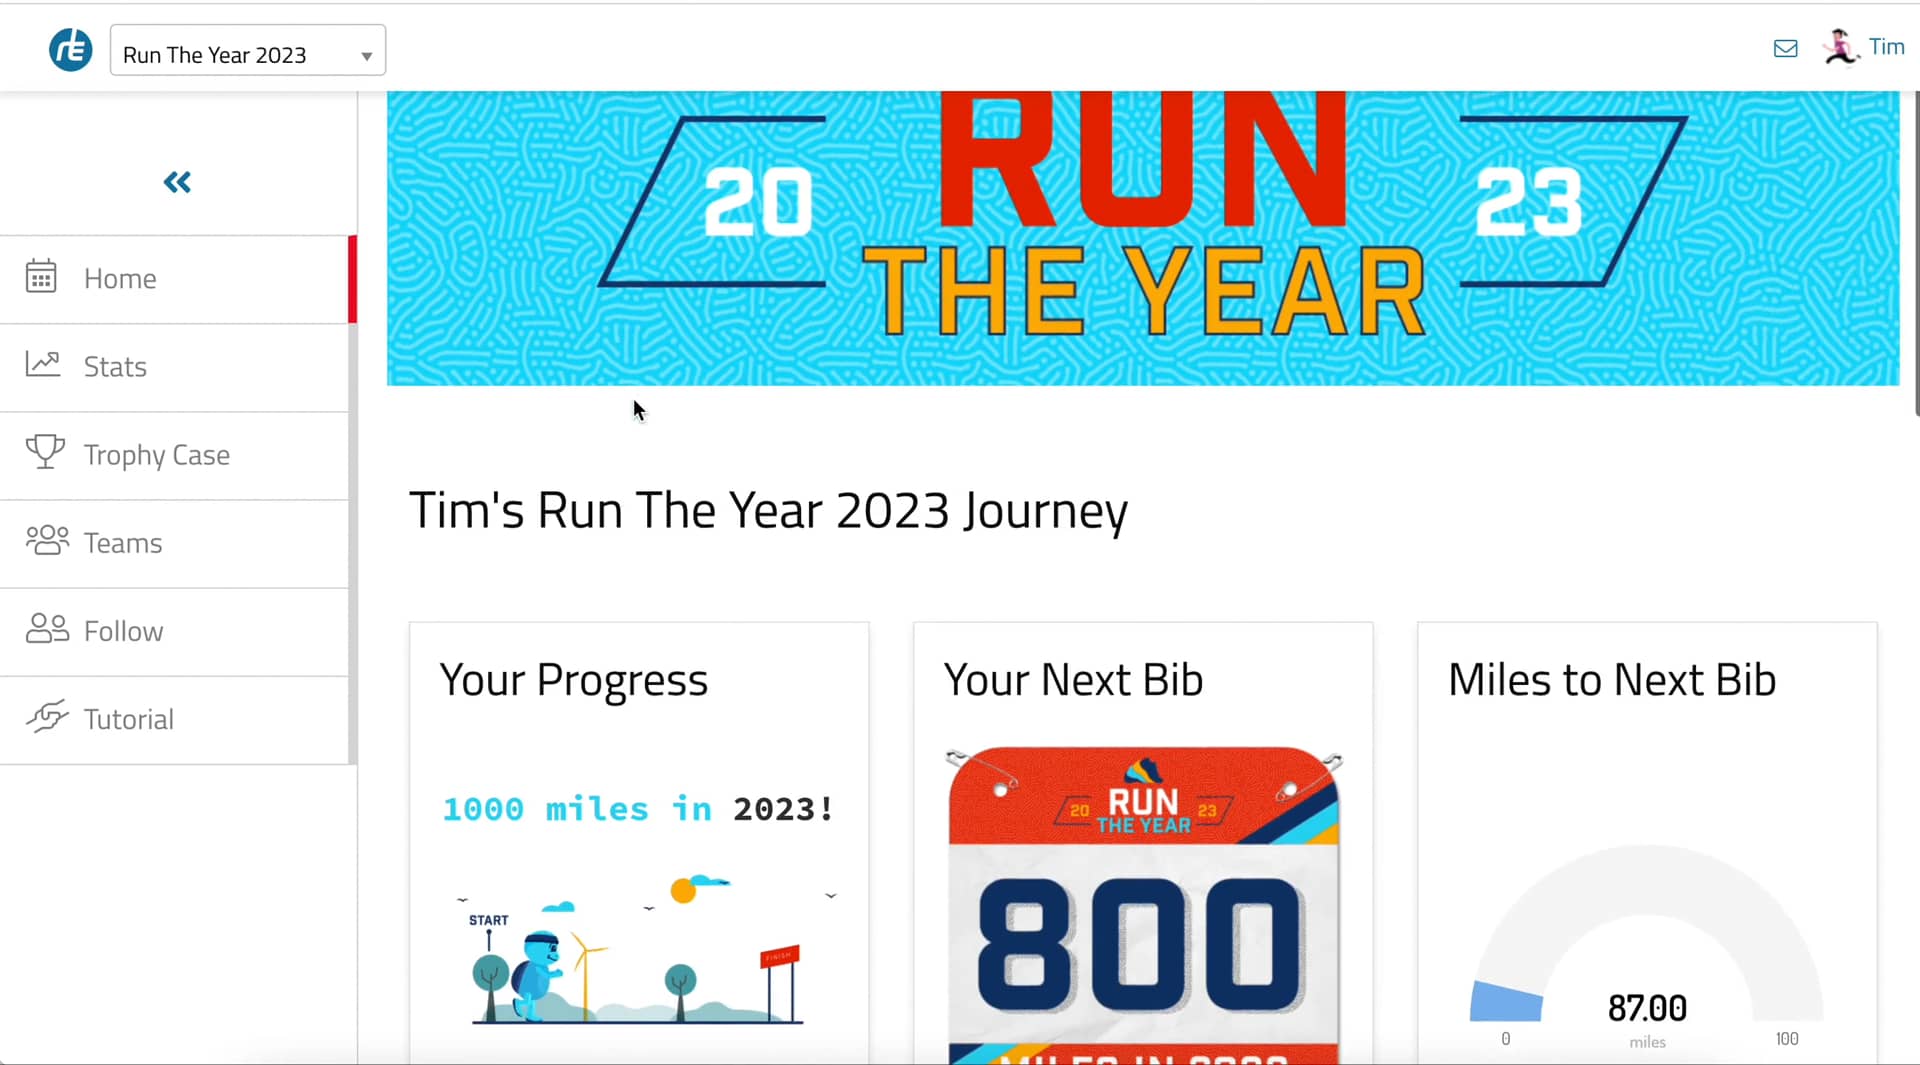 Official Run The Year® 2023 Tracker Overview on Vimeo